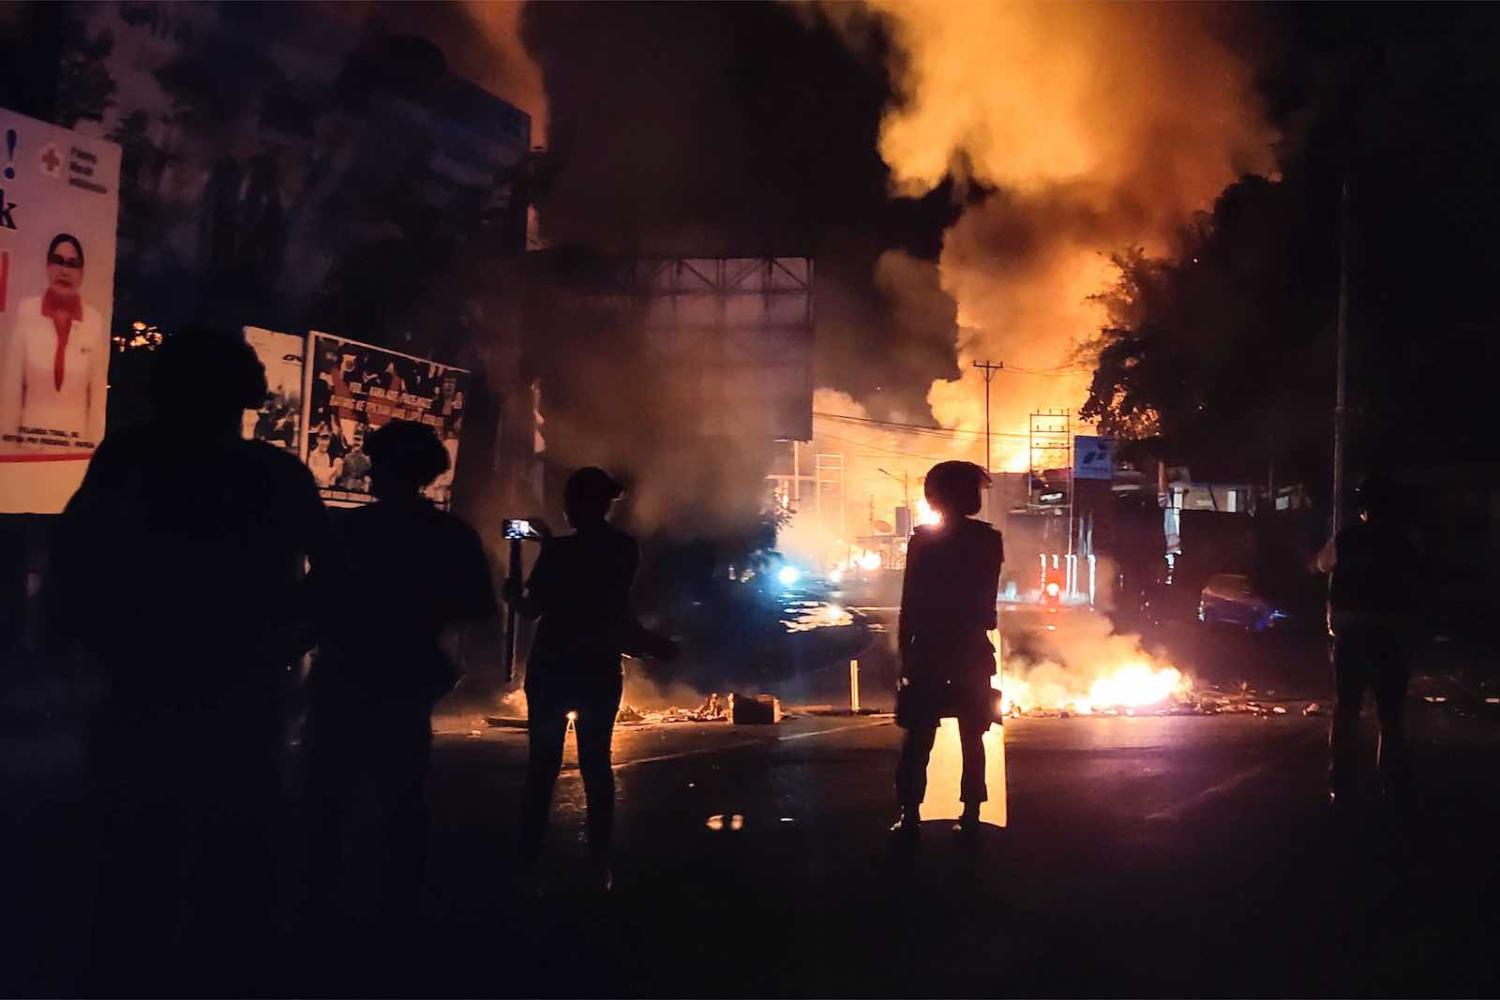 Buildings burn after hundreds of demonstrators marched near Papua’s biggest city, Jayapura, on 29 August (Photo: Indra Thamrin Hatta/AFP/Getty Images)